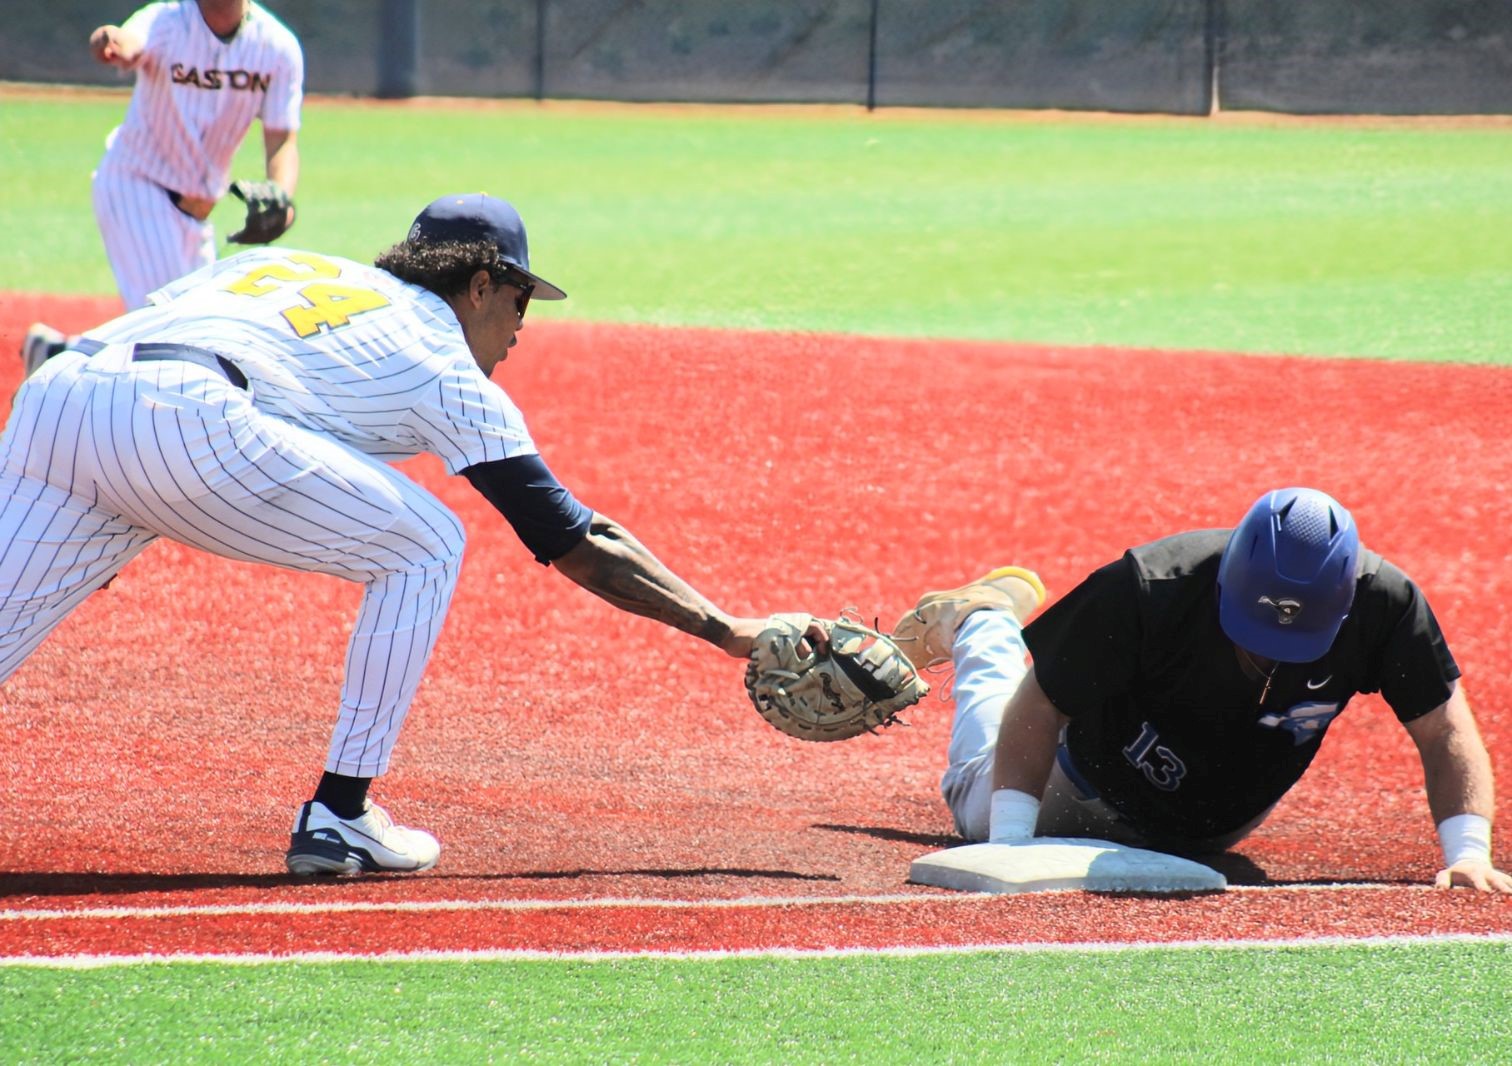 Gaston College first baseman Freddie Oliver (left) reaches to make a tag during Friday's doubleheader.